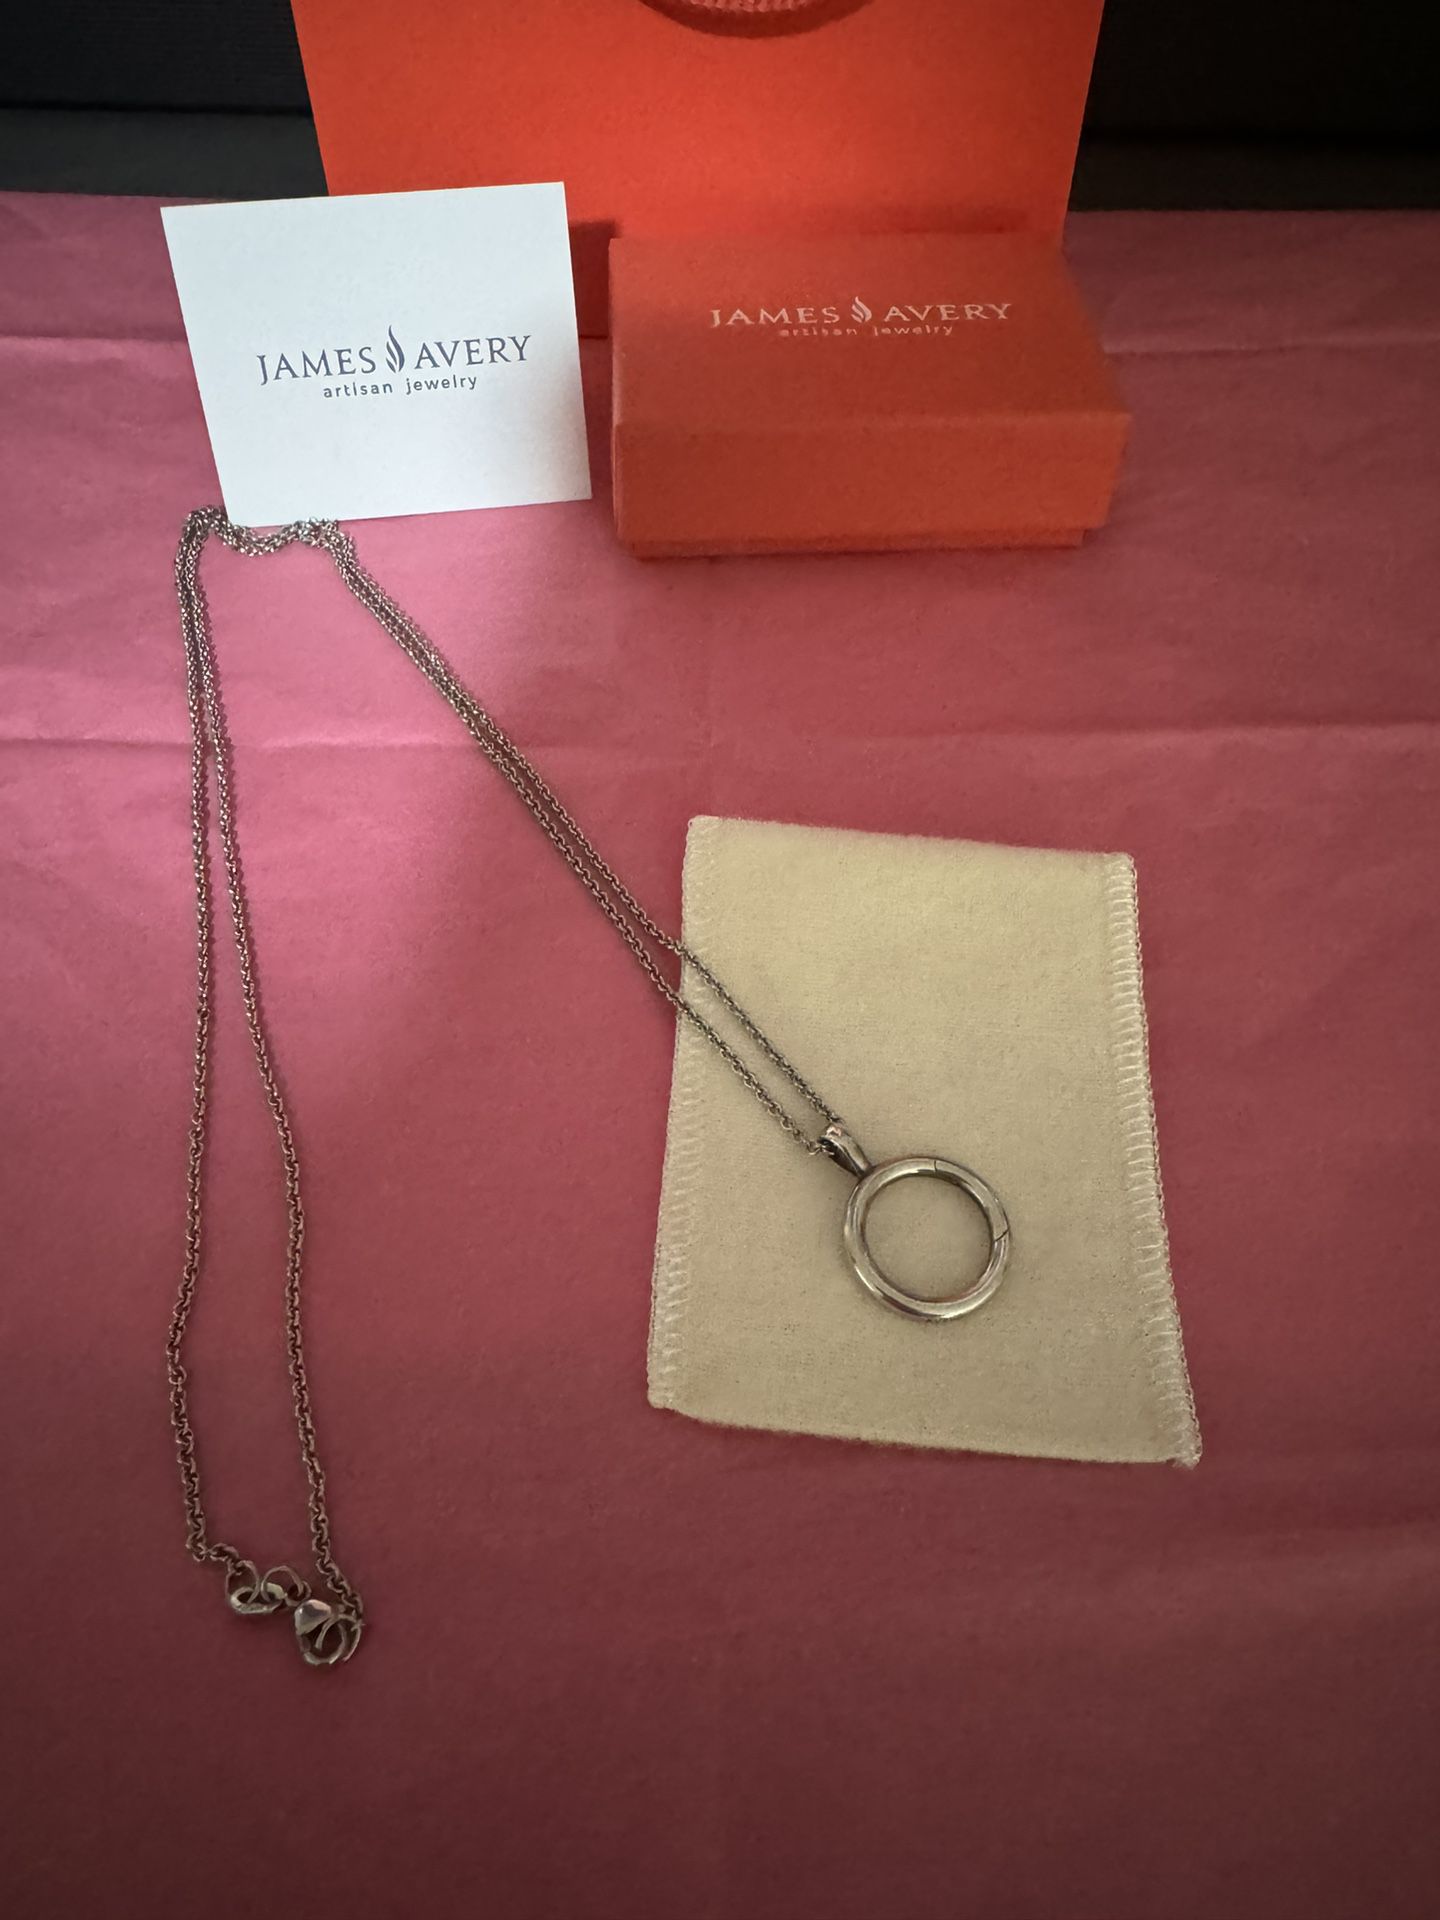 James Avery Circle Changeable Charm Necklace